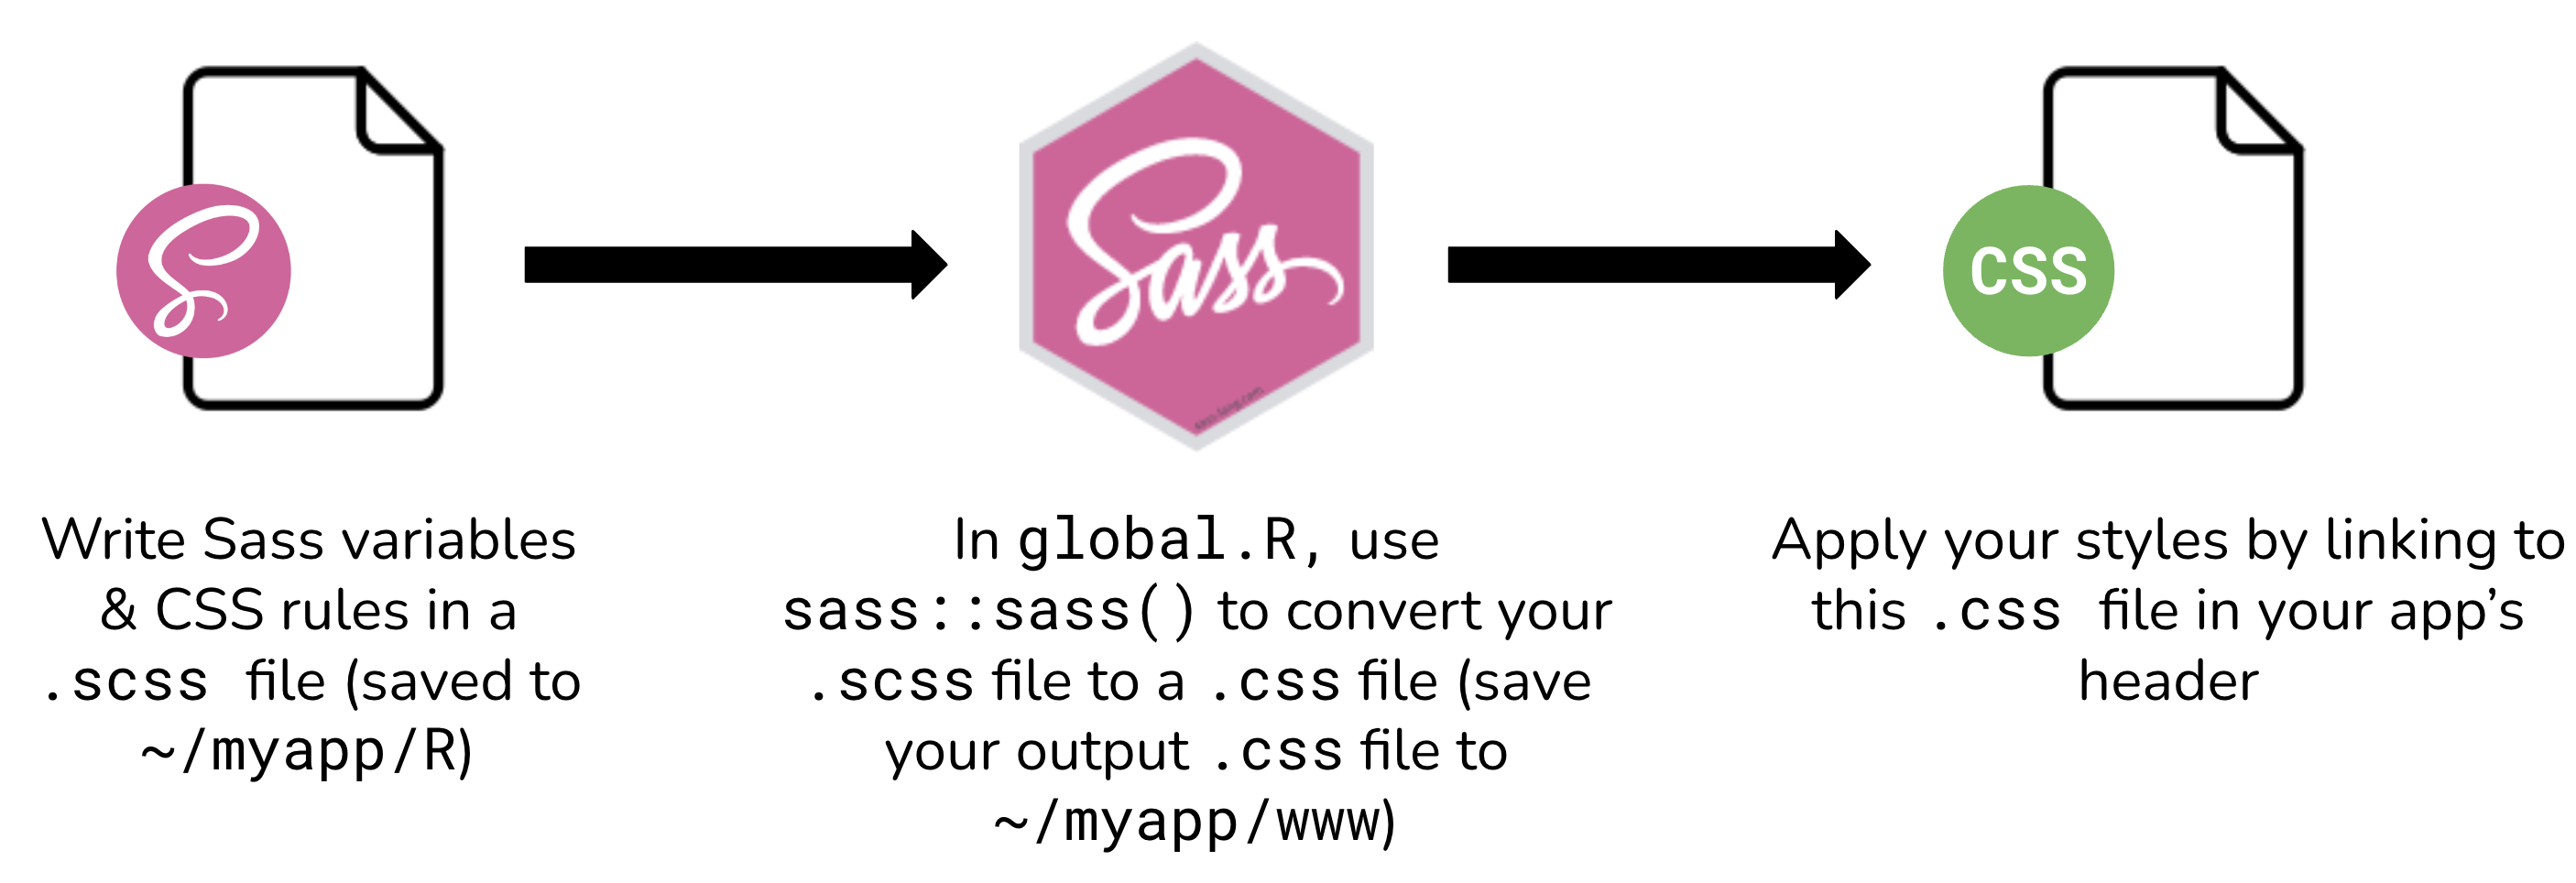 A chart showing the Sass to CSS workflow -- begin with writing Sass variables and CSS rule in a .scss file, then use the sass R package to compile sass to css, and finally use your compiled .css file to apply your styles to your app.